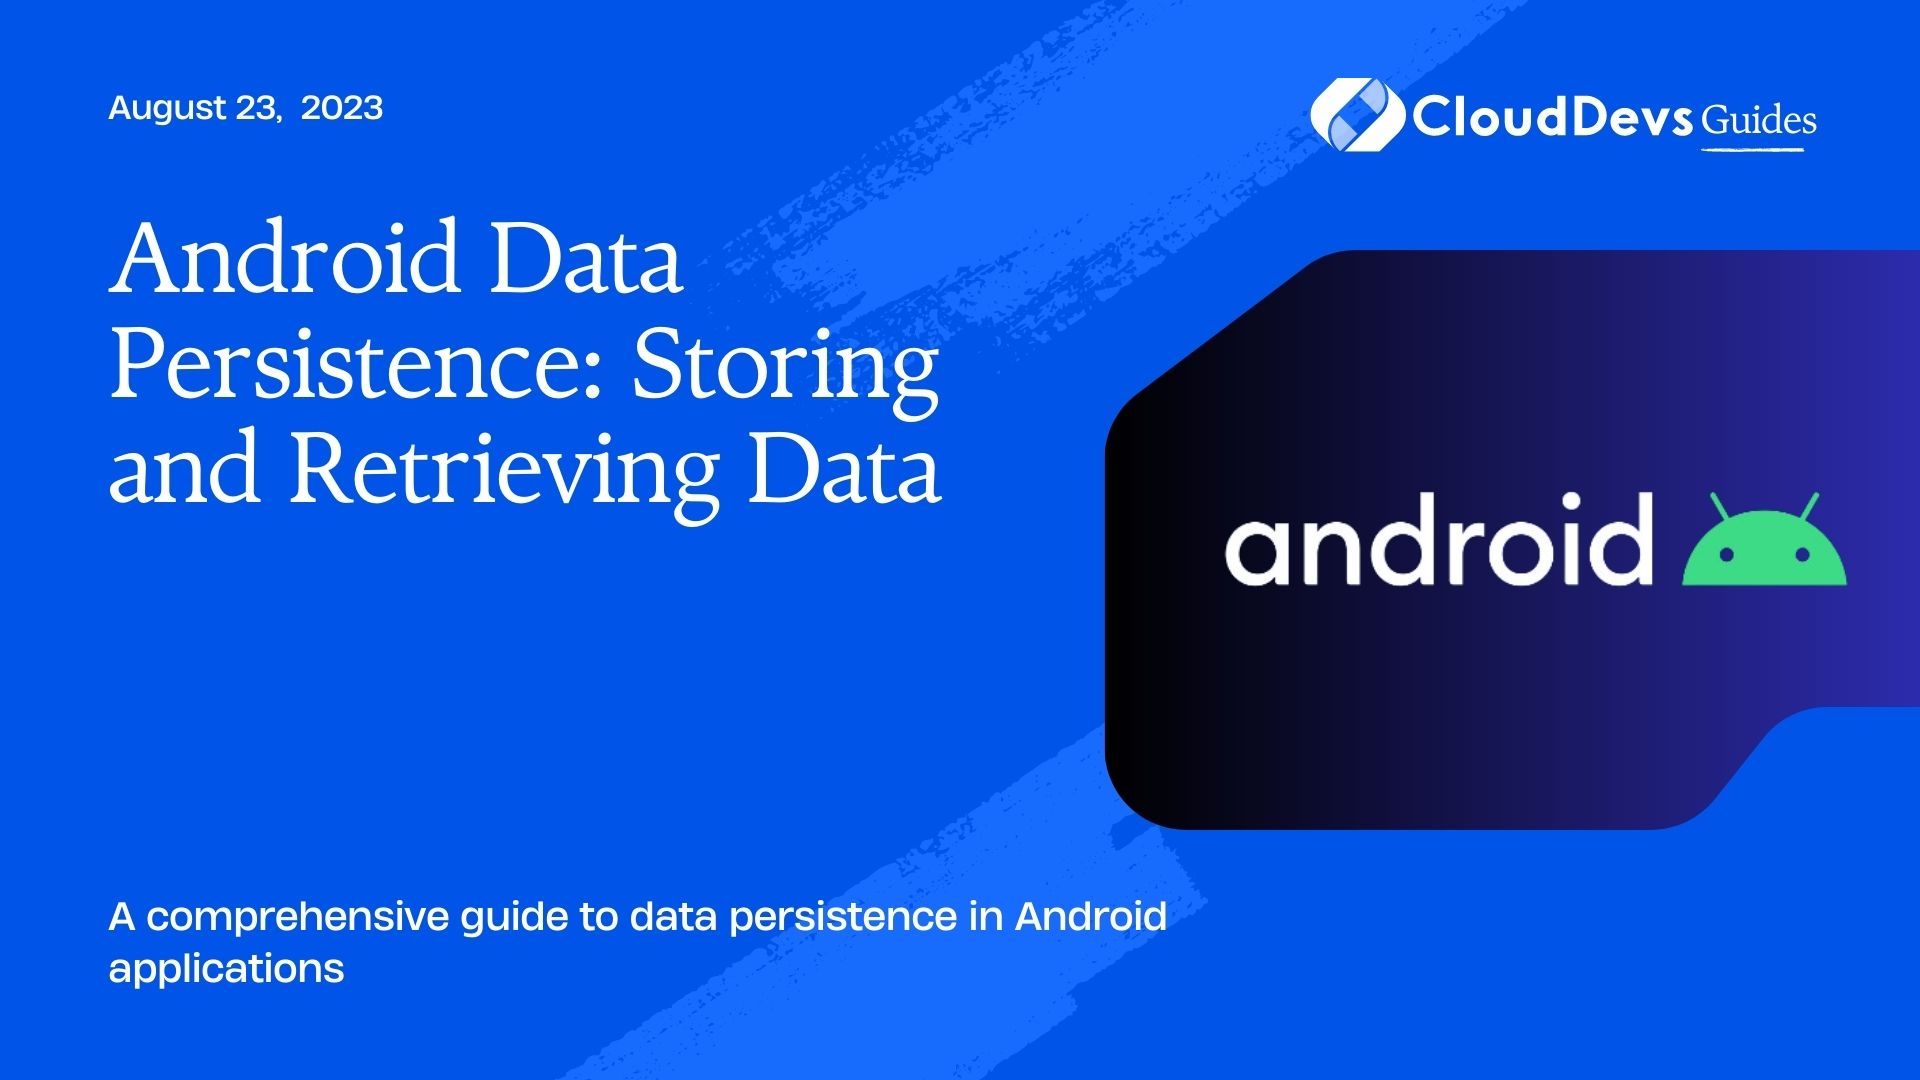 Android Data Persistence: Storing and Retrieving Data